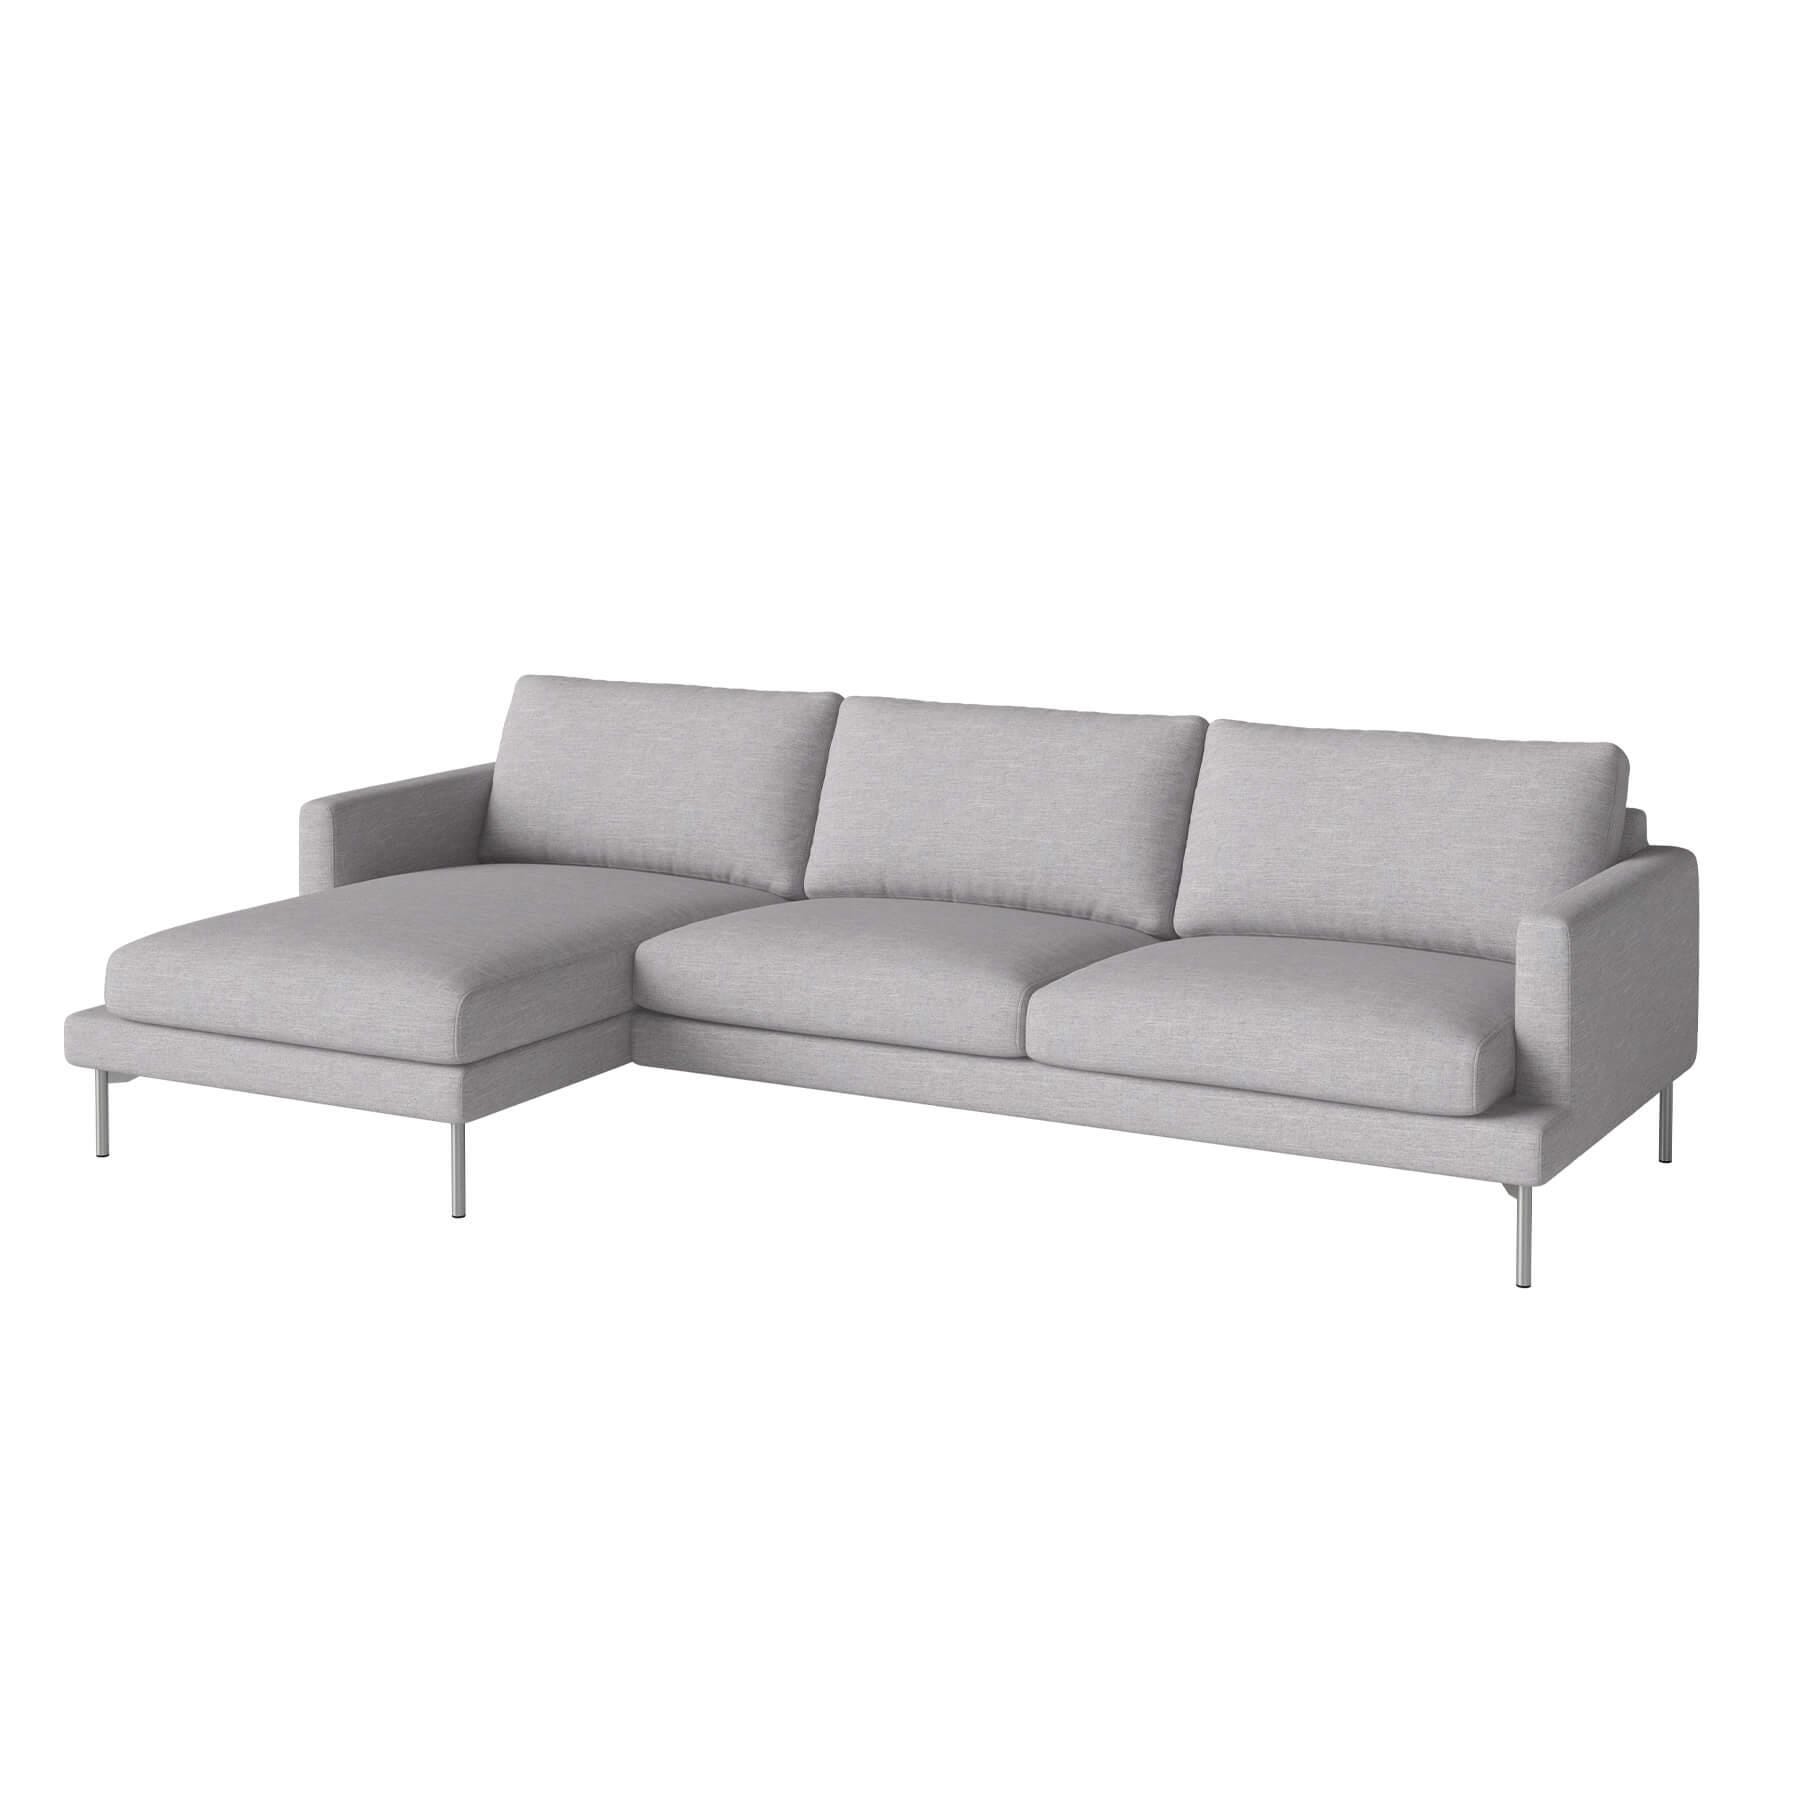 Bolia Veneda Sofa 35 Seater Sofa With Chaise Longue Brushed Steel Baize Light Grey Left Grey Designer Furniture From Holloways Of Ludlow